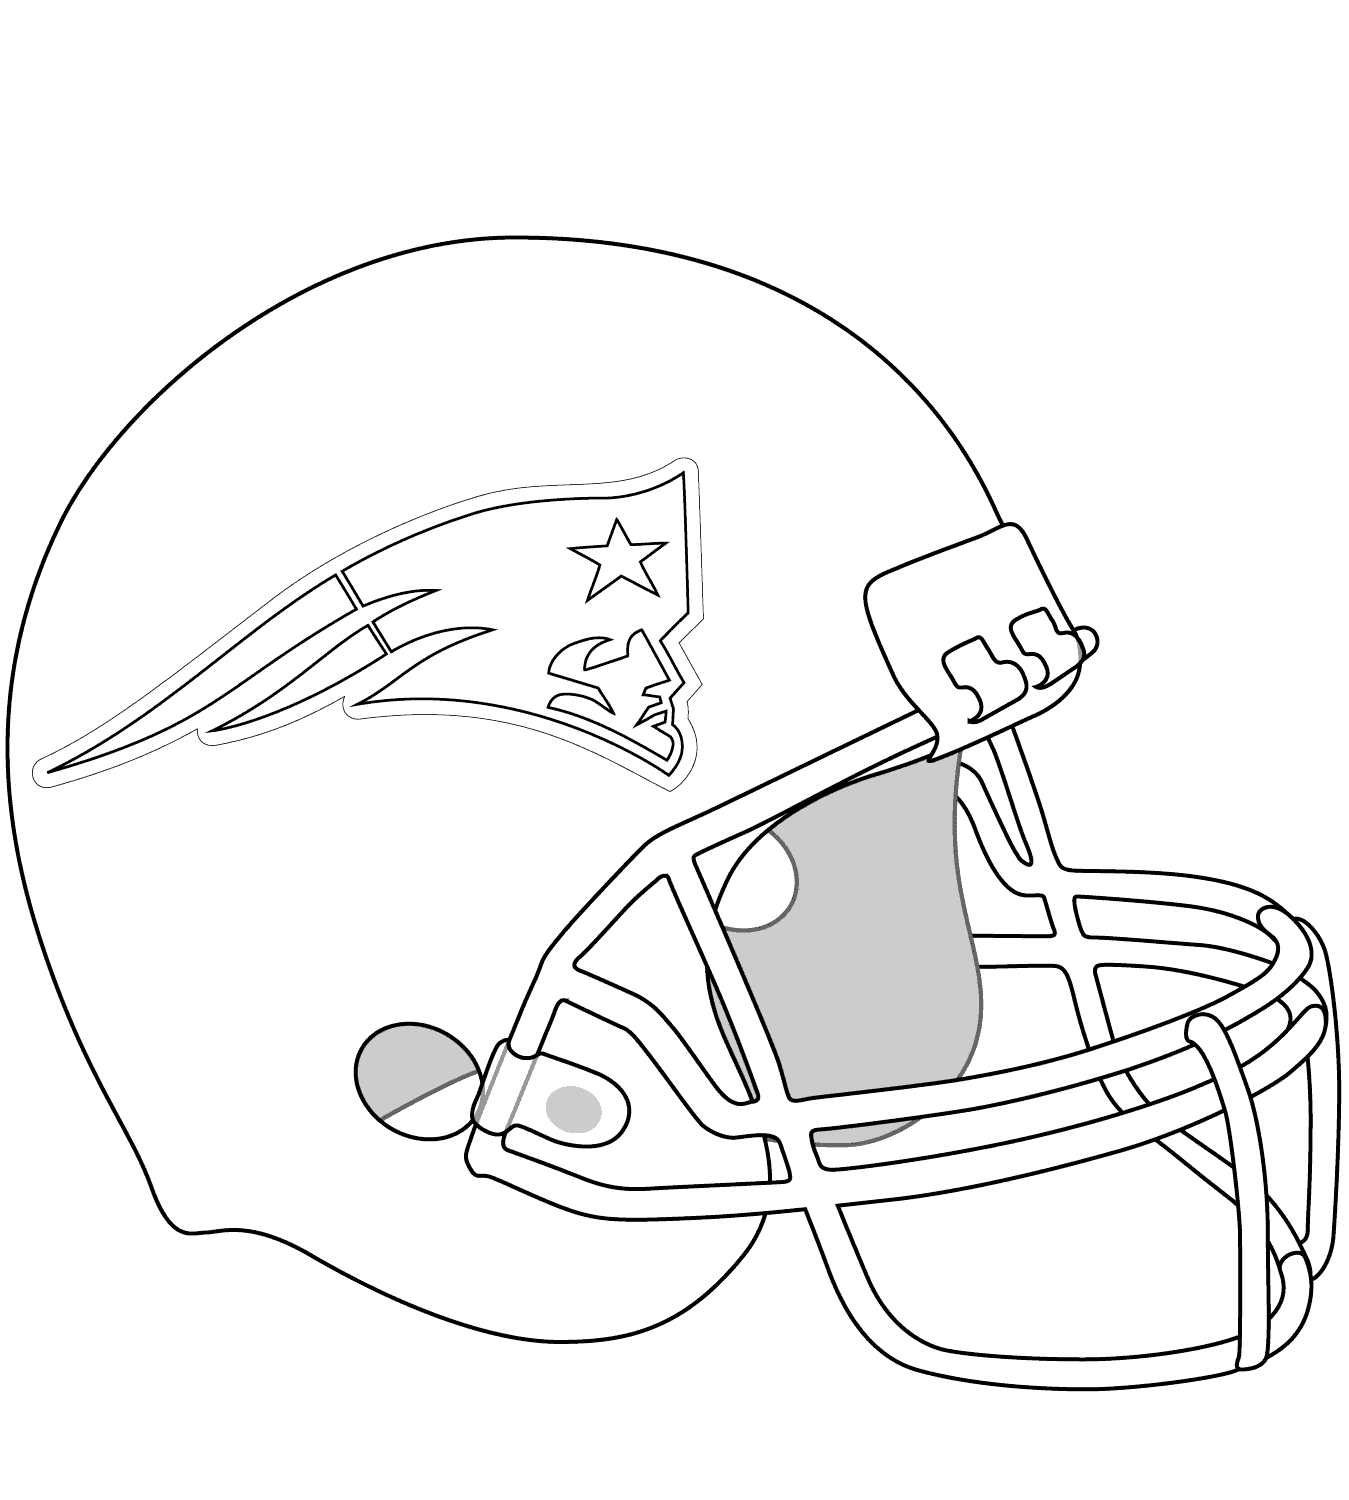 new england patriots coloring pages